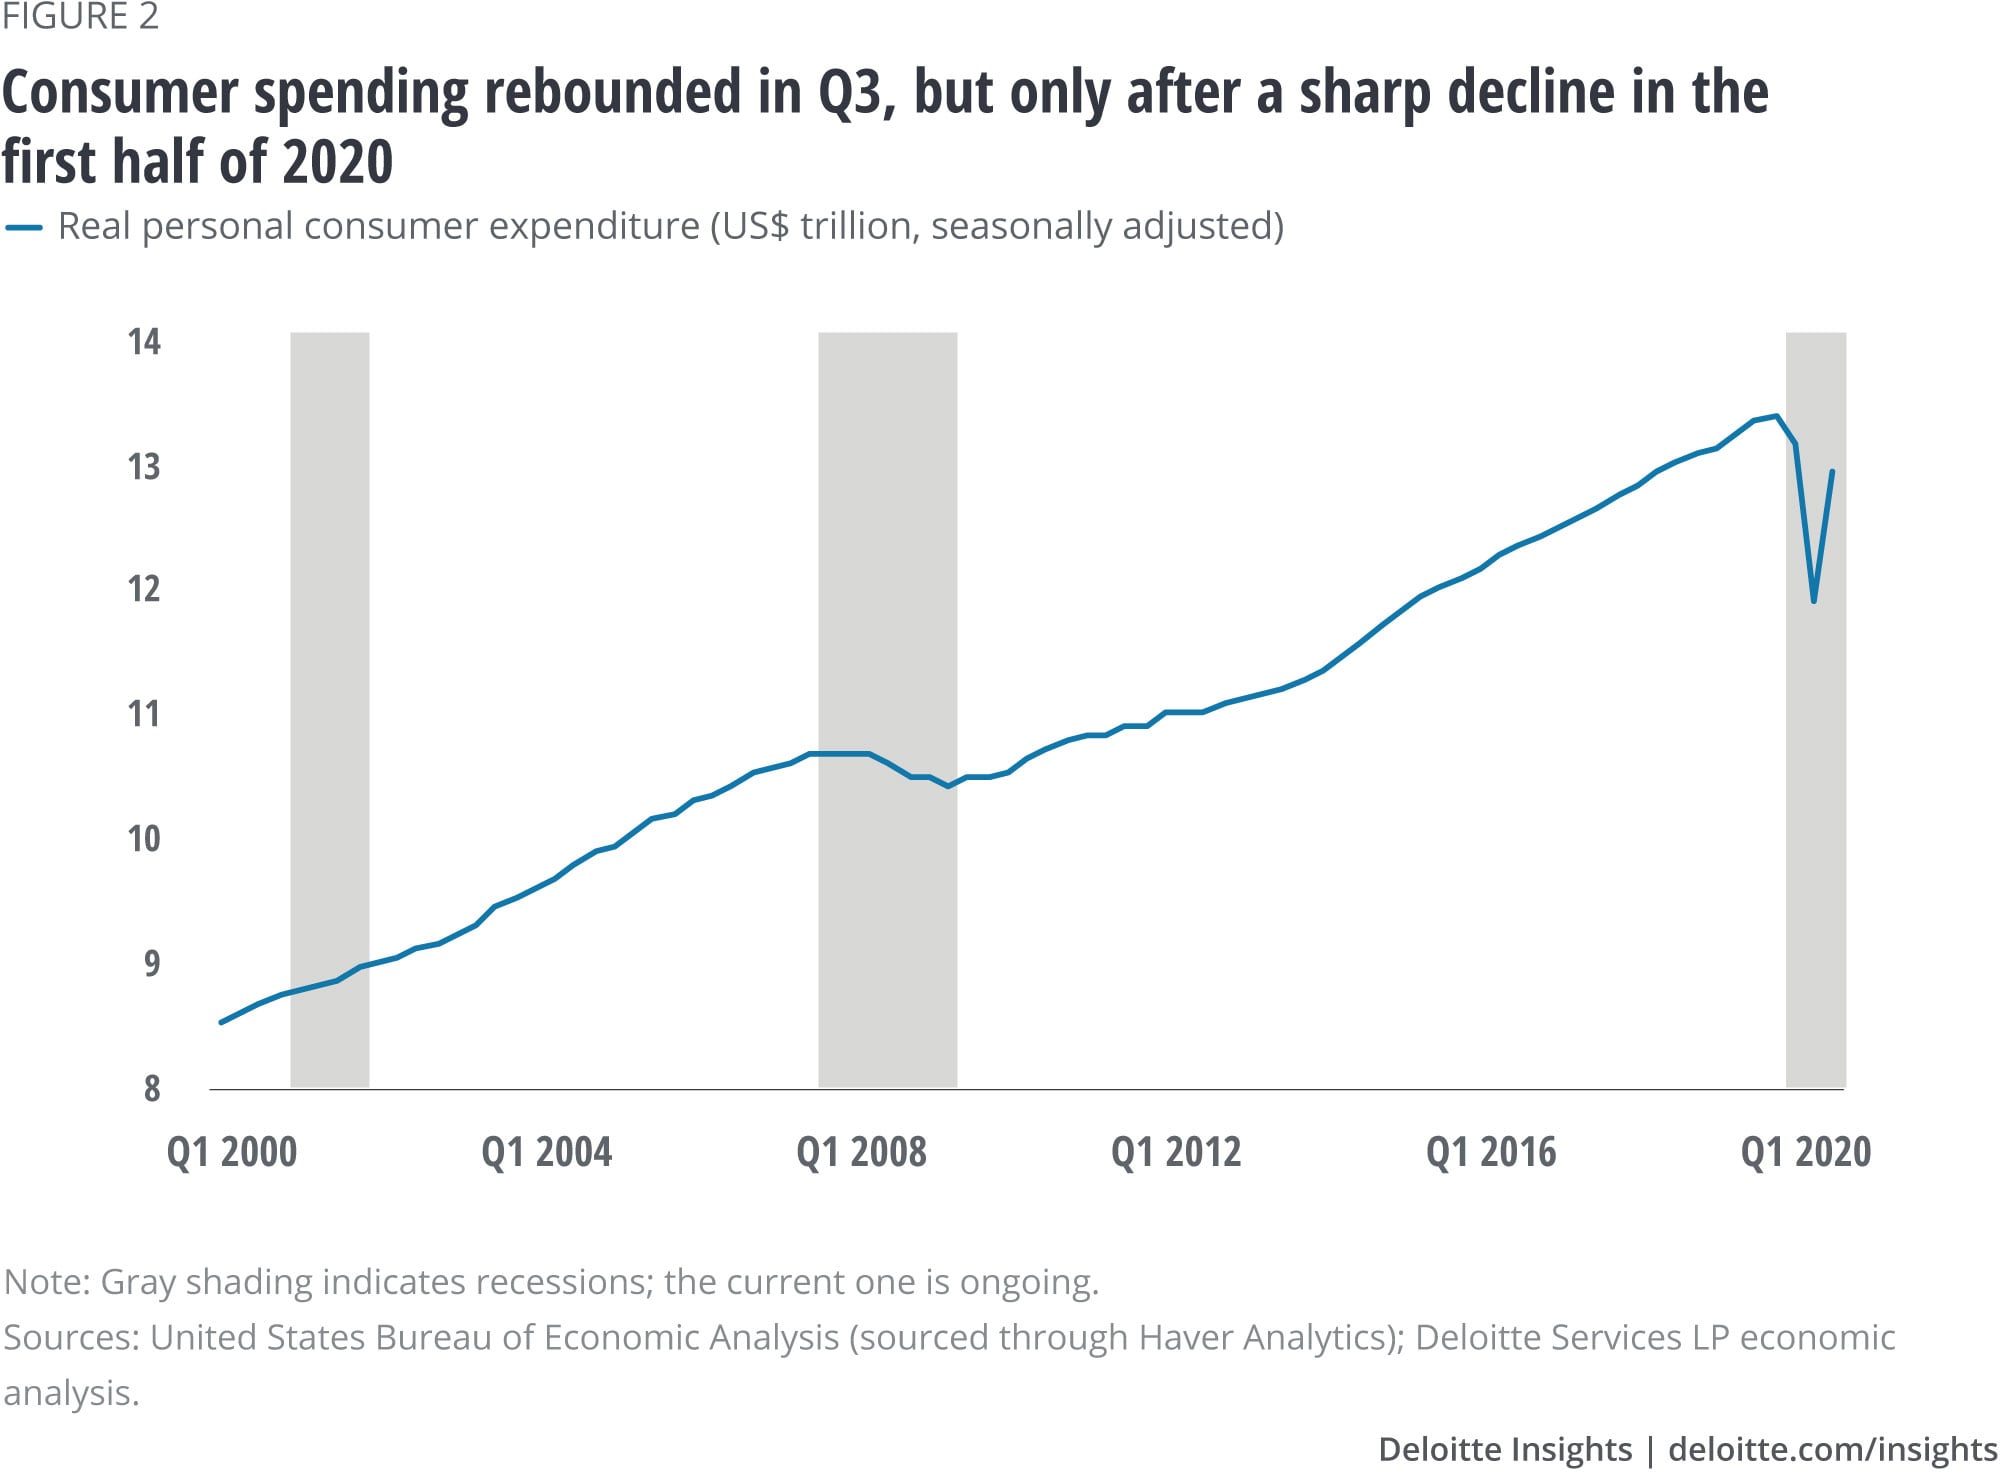 Consumer spending rebounded in Q3, but only after a sharp decline in the first half of 2020